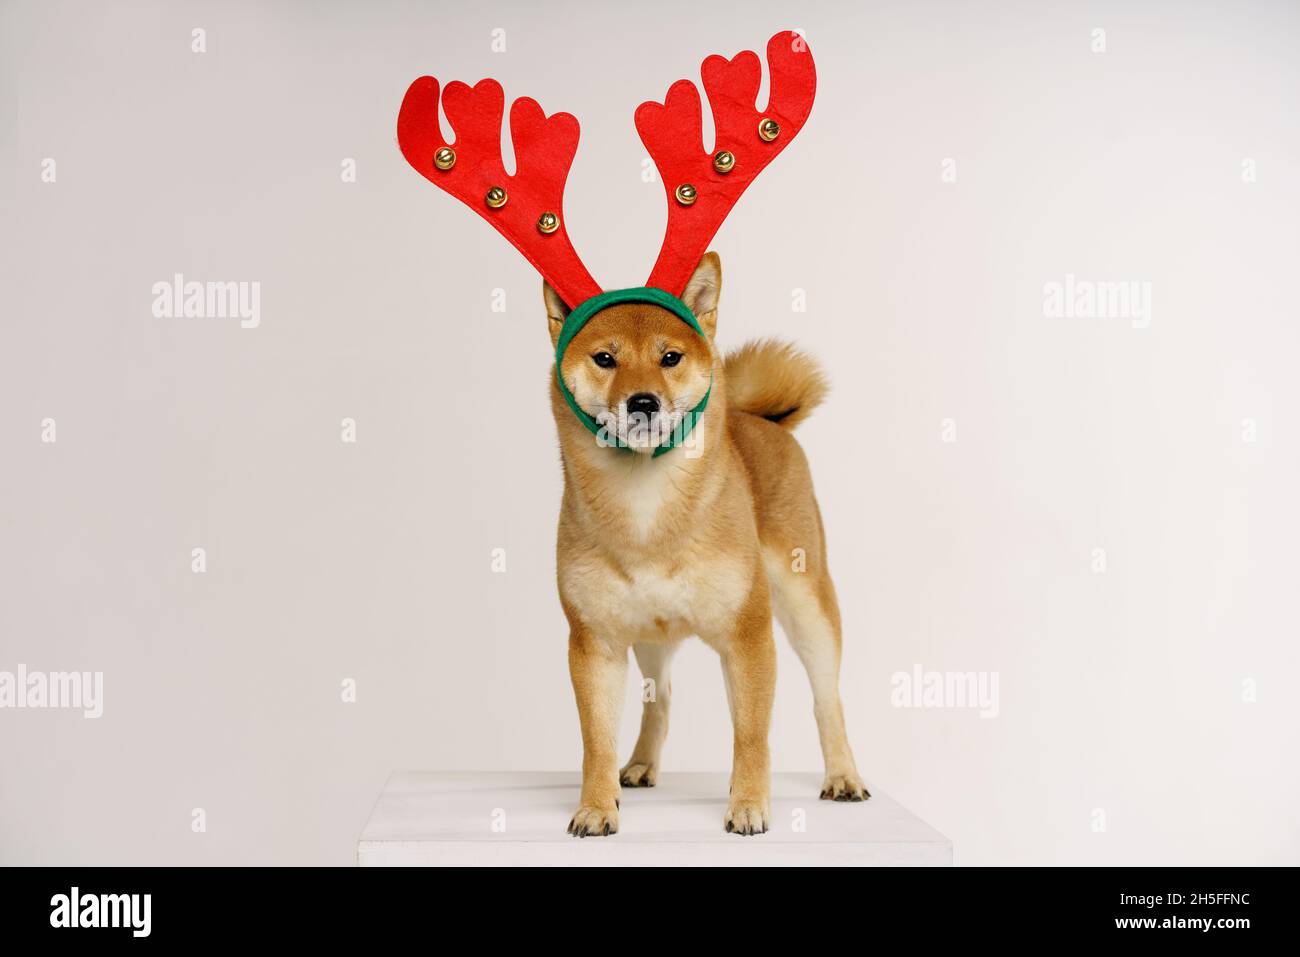 Cute funny dog in red deer antlers posing in studio on light background. Concept for christmas and new year holidays and discounts Stock Photo